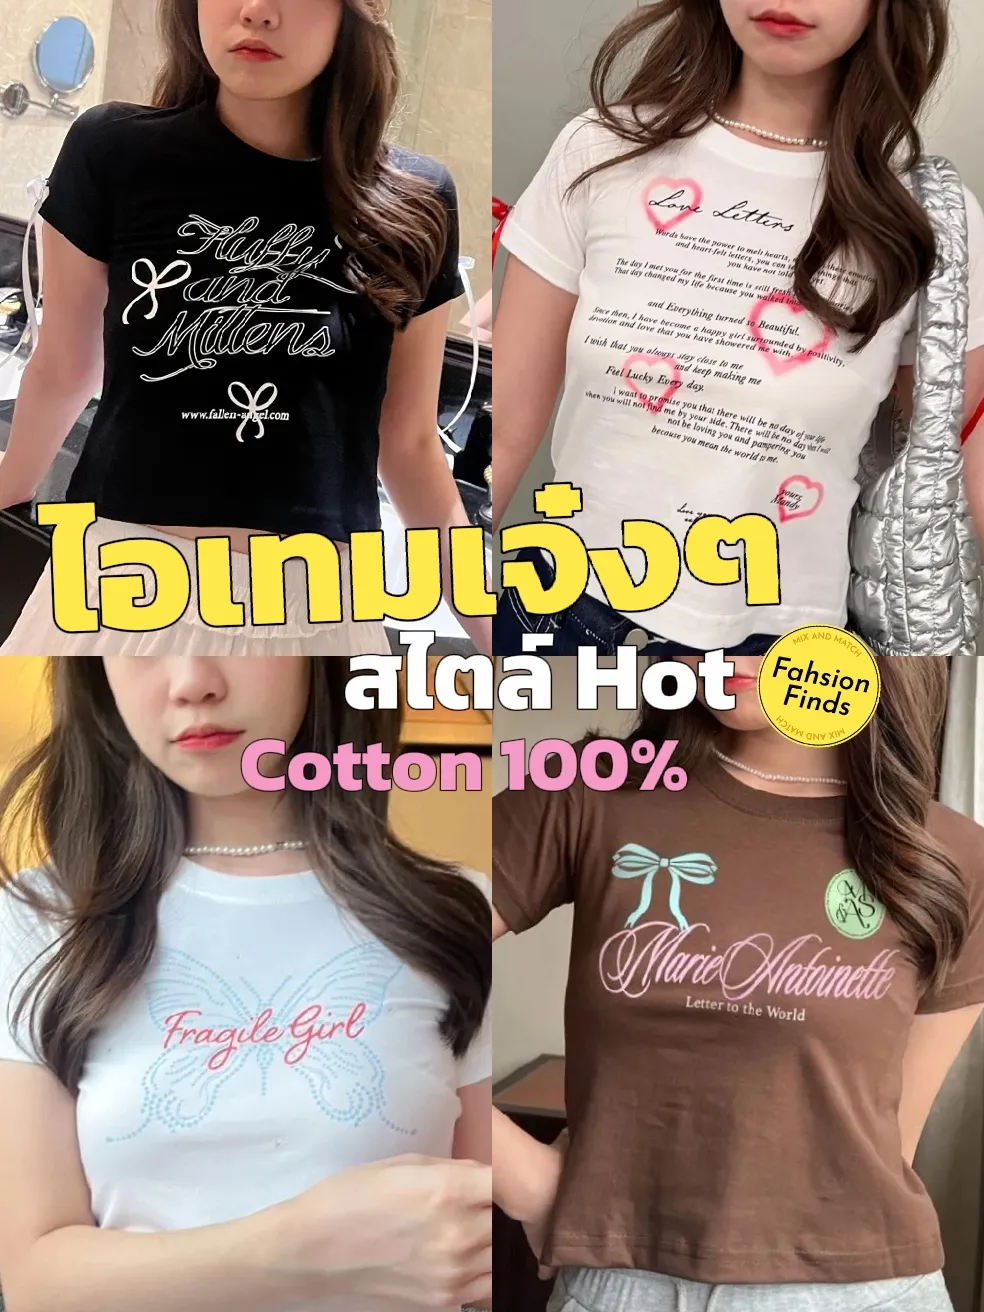 How to get cute FREE t shirts-🤑😍😱 